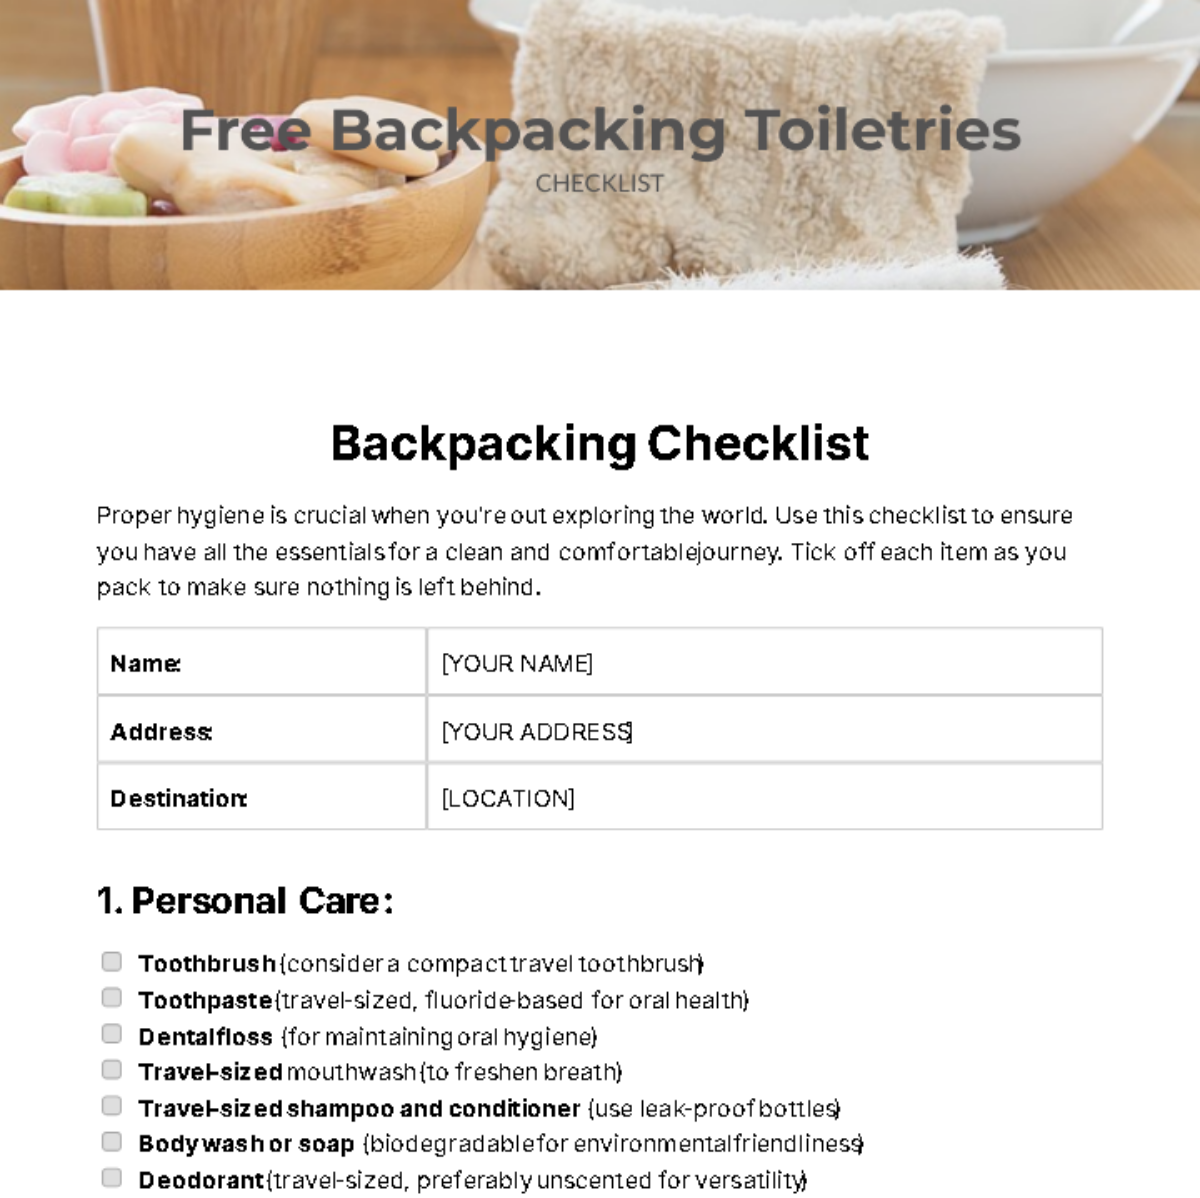 Free Backpacking Toiletries Checklist Template